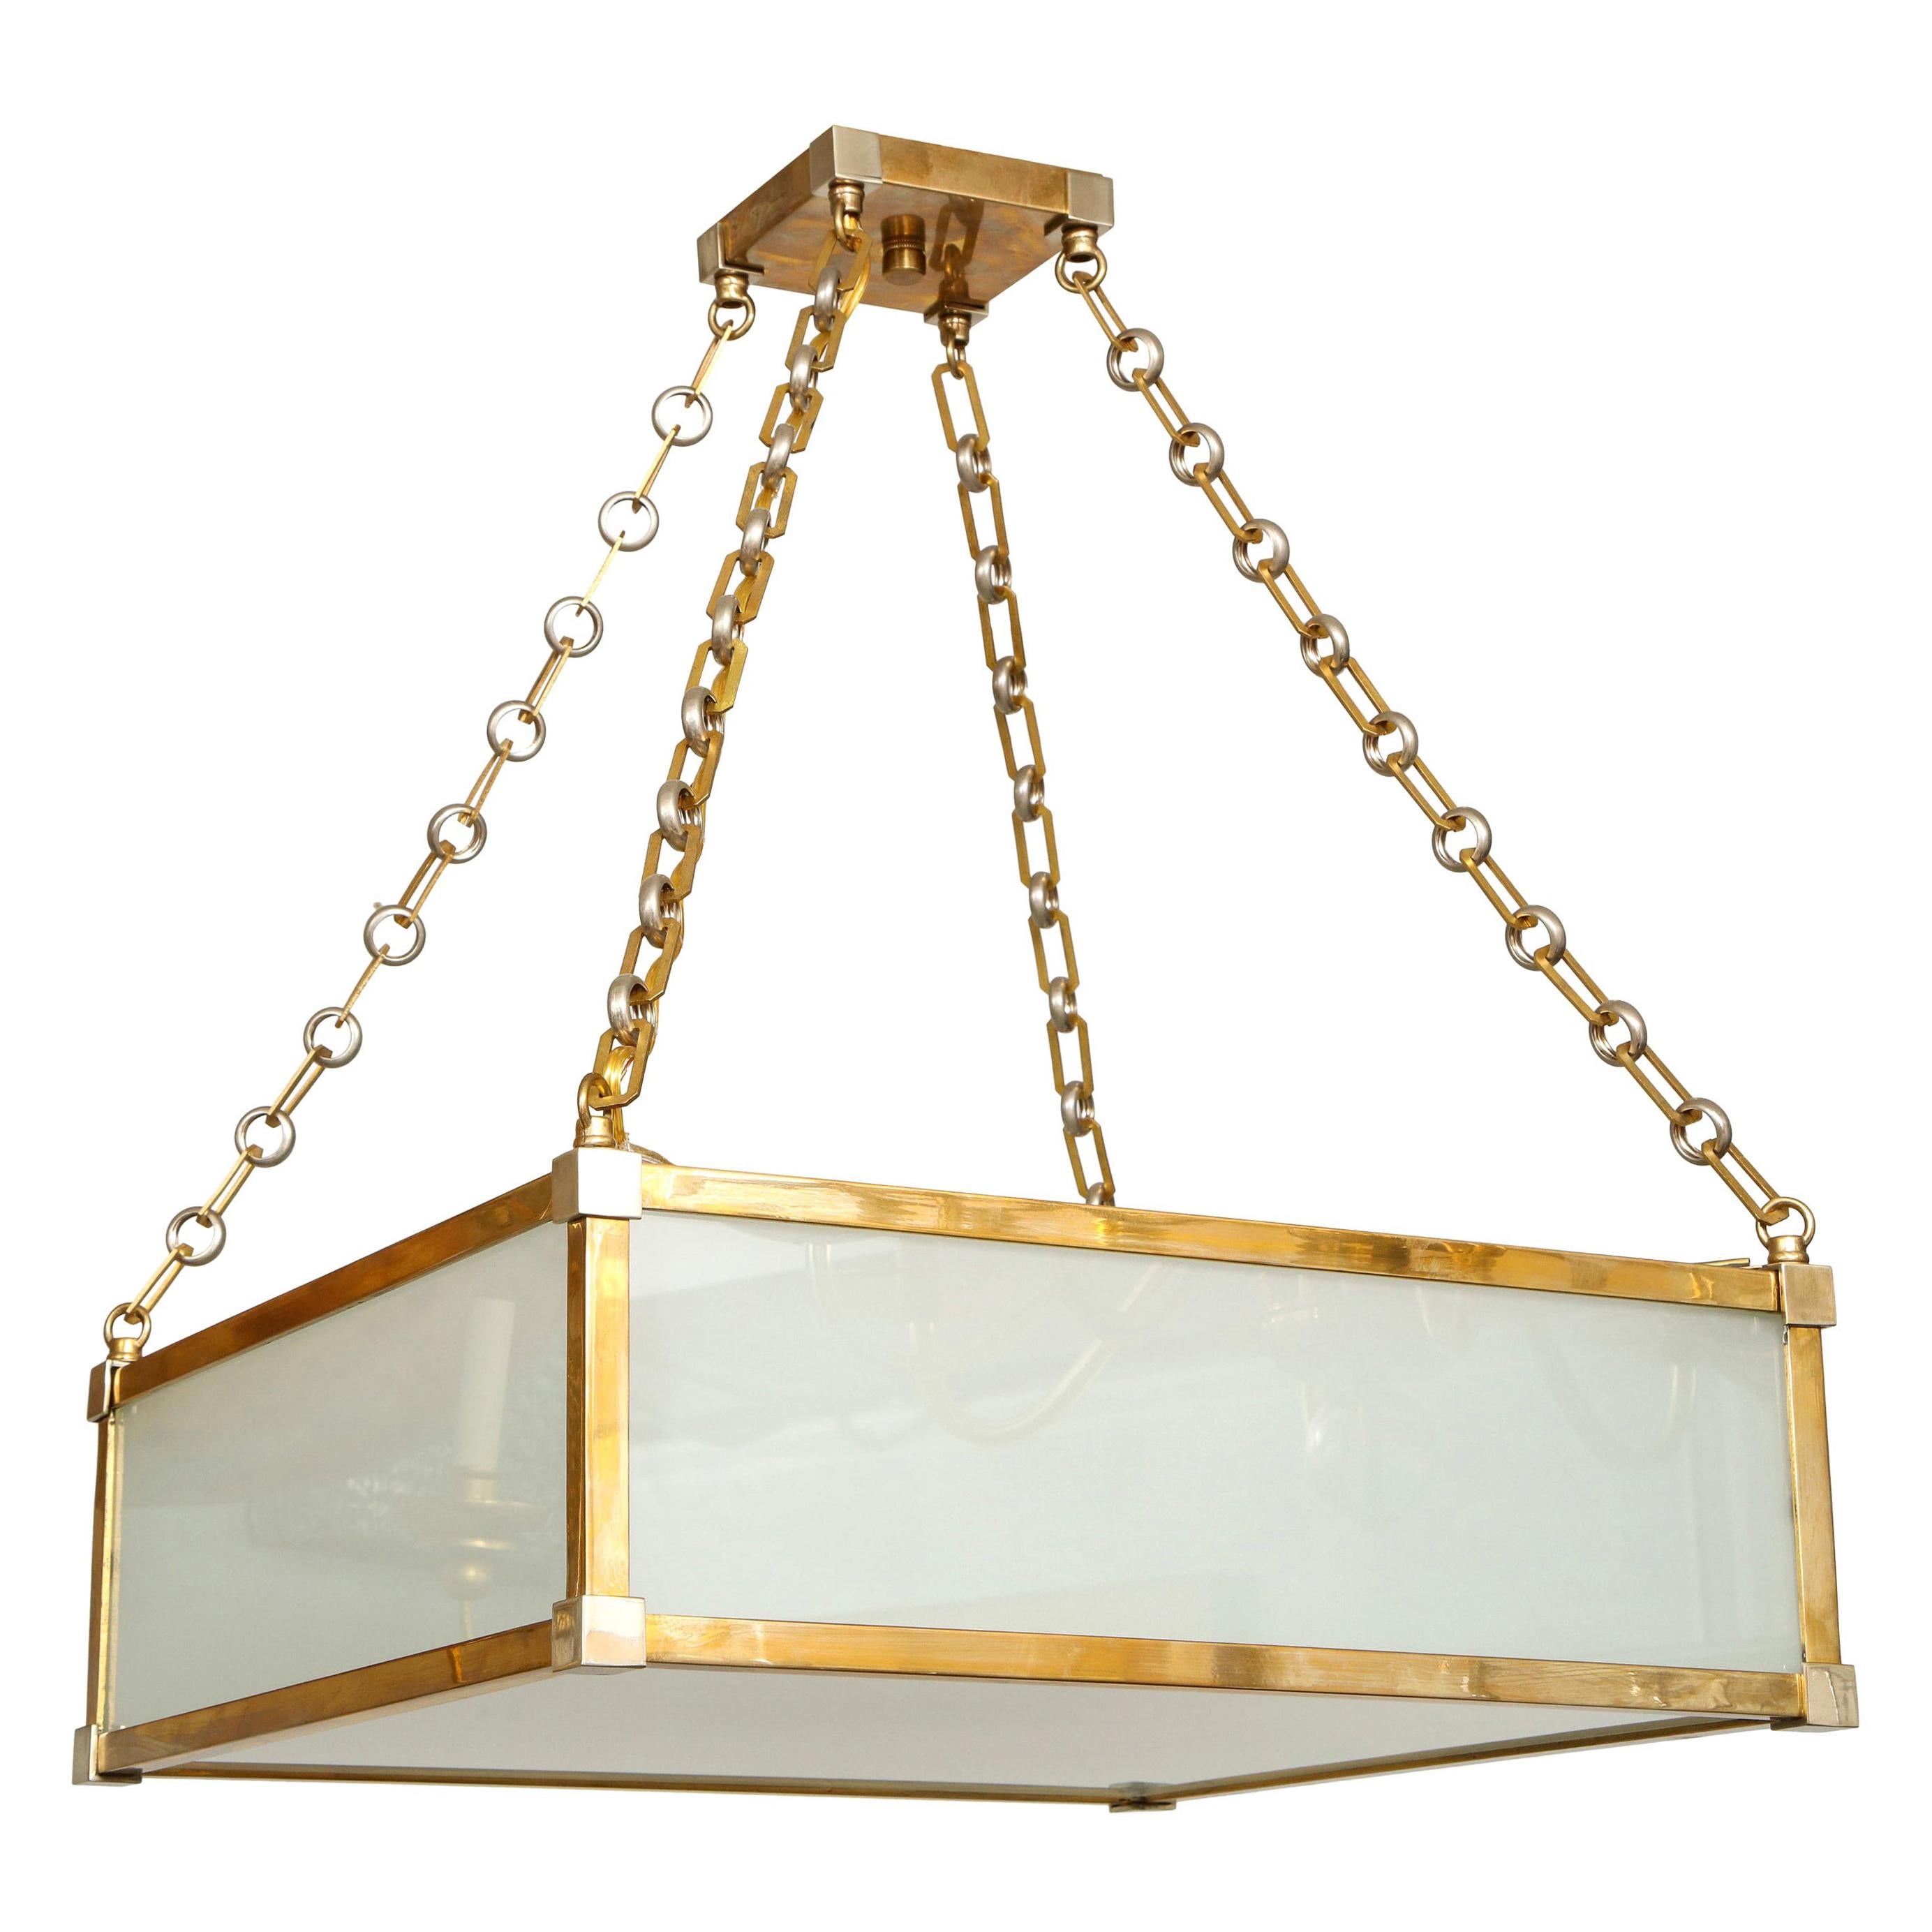 Custom Art Deco Style Nickel and Brass-Plated Pendant Fixture